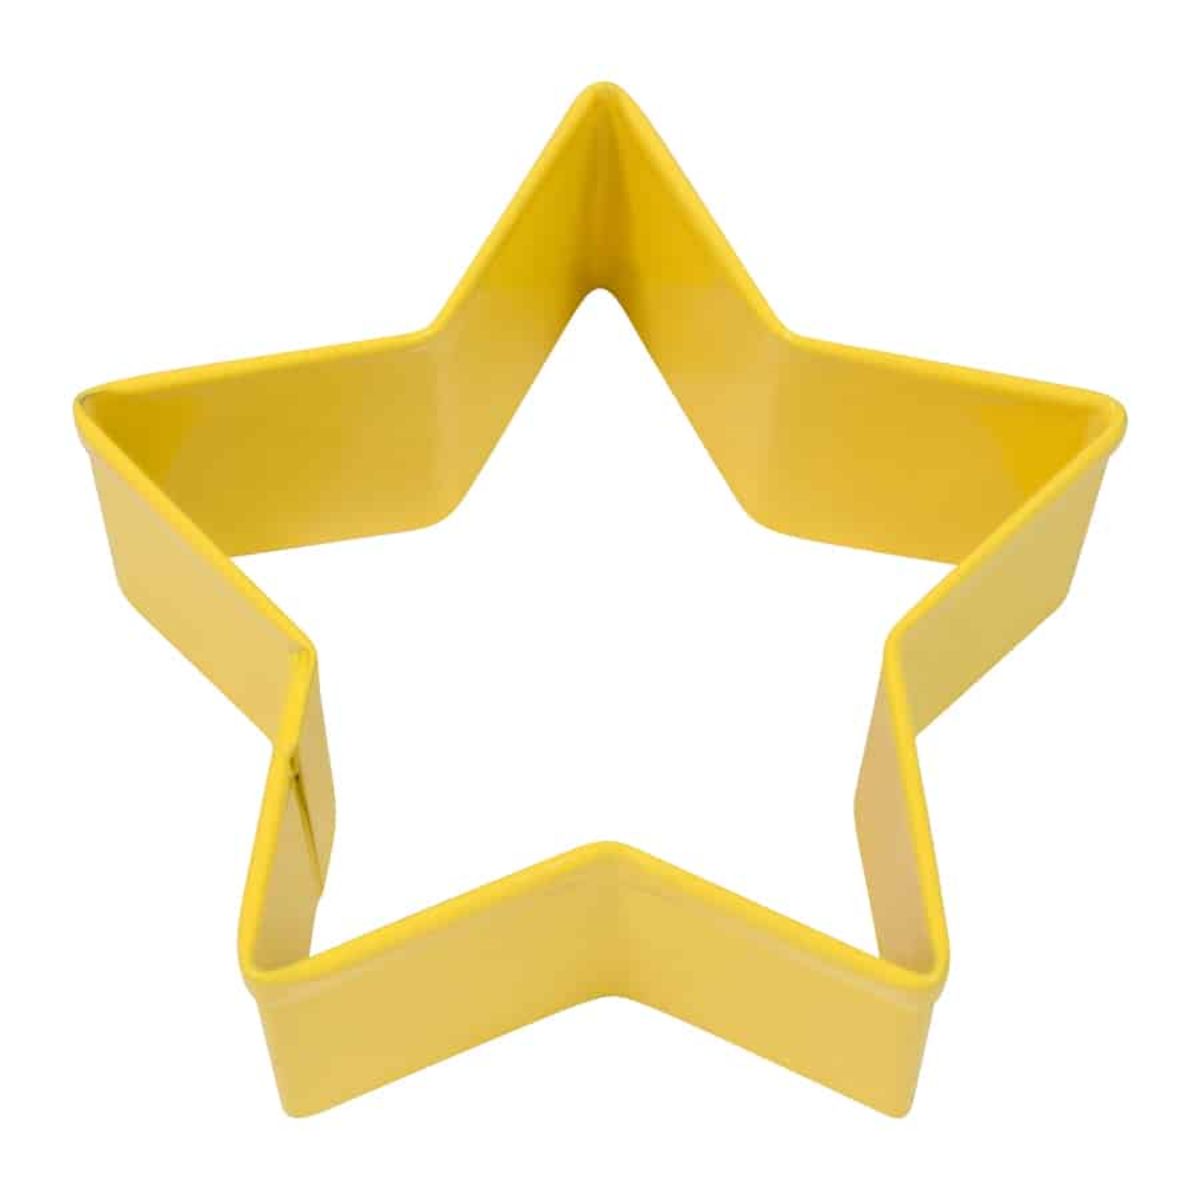 R&M Cookie Cutter Star Yellow 2.75"